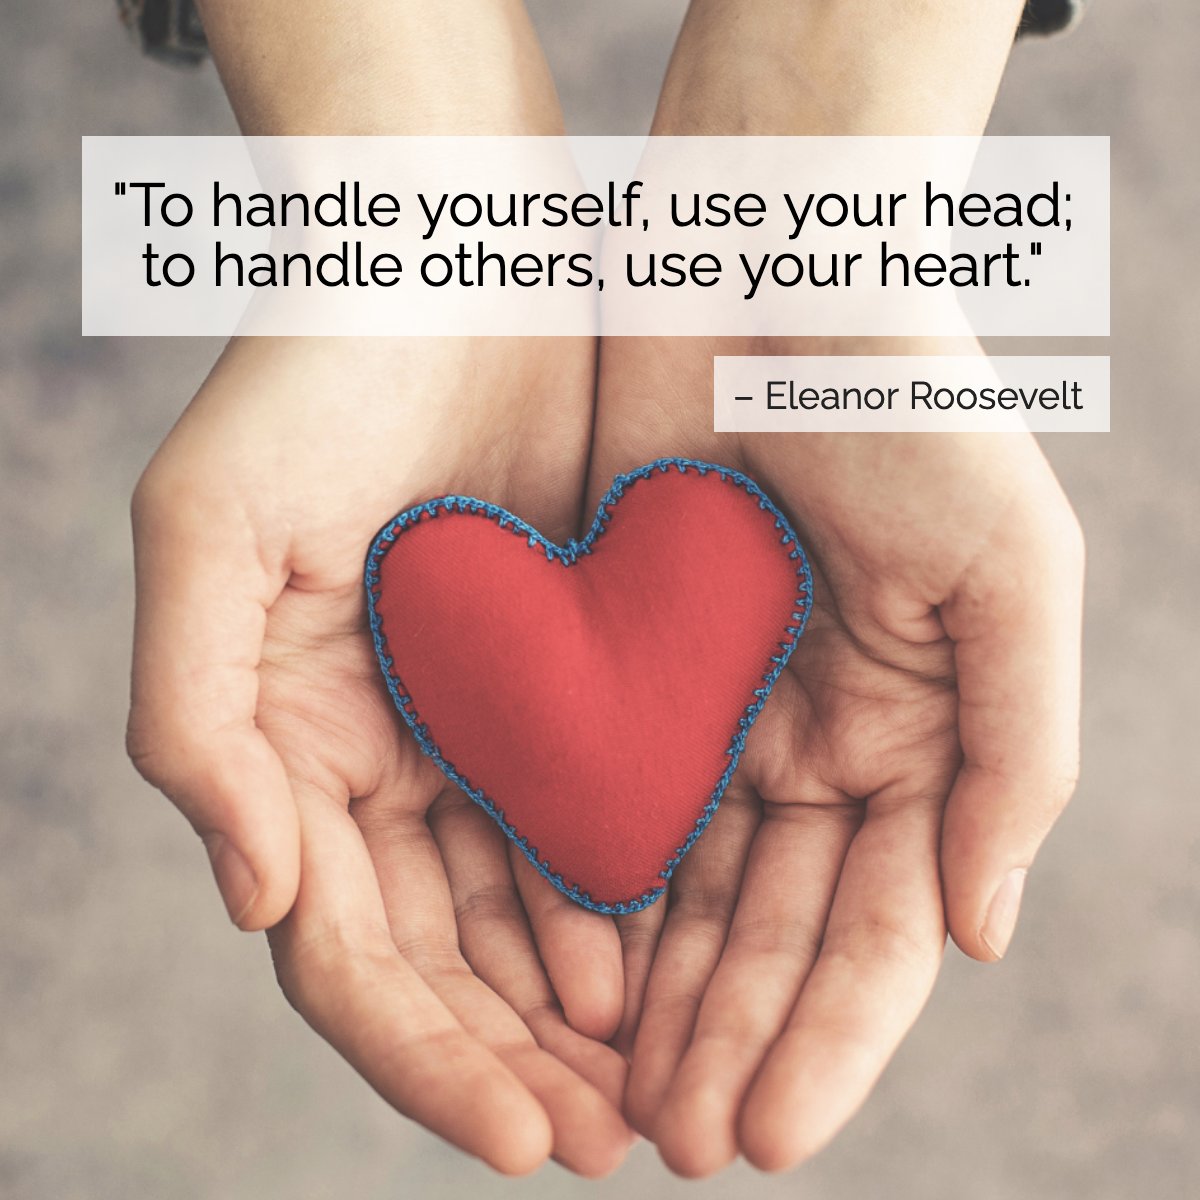 Eleanor Roosevelt was an American political figure, diplomat, and activist. 

She served as the first lady of the United States from 1933 to 1945!

#inspiring #quote #eleanorroosevelt #inspirational 
 #AndreaDavis